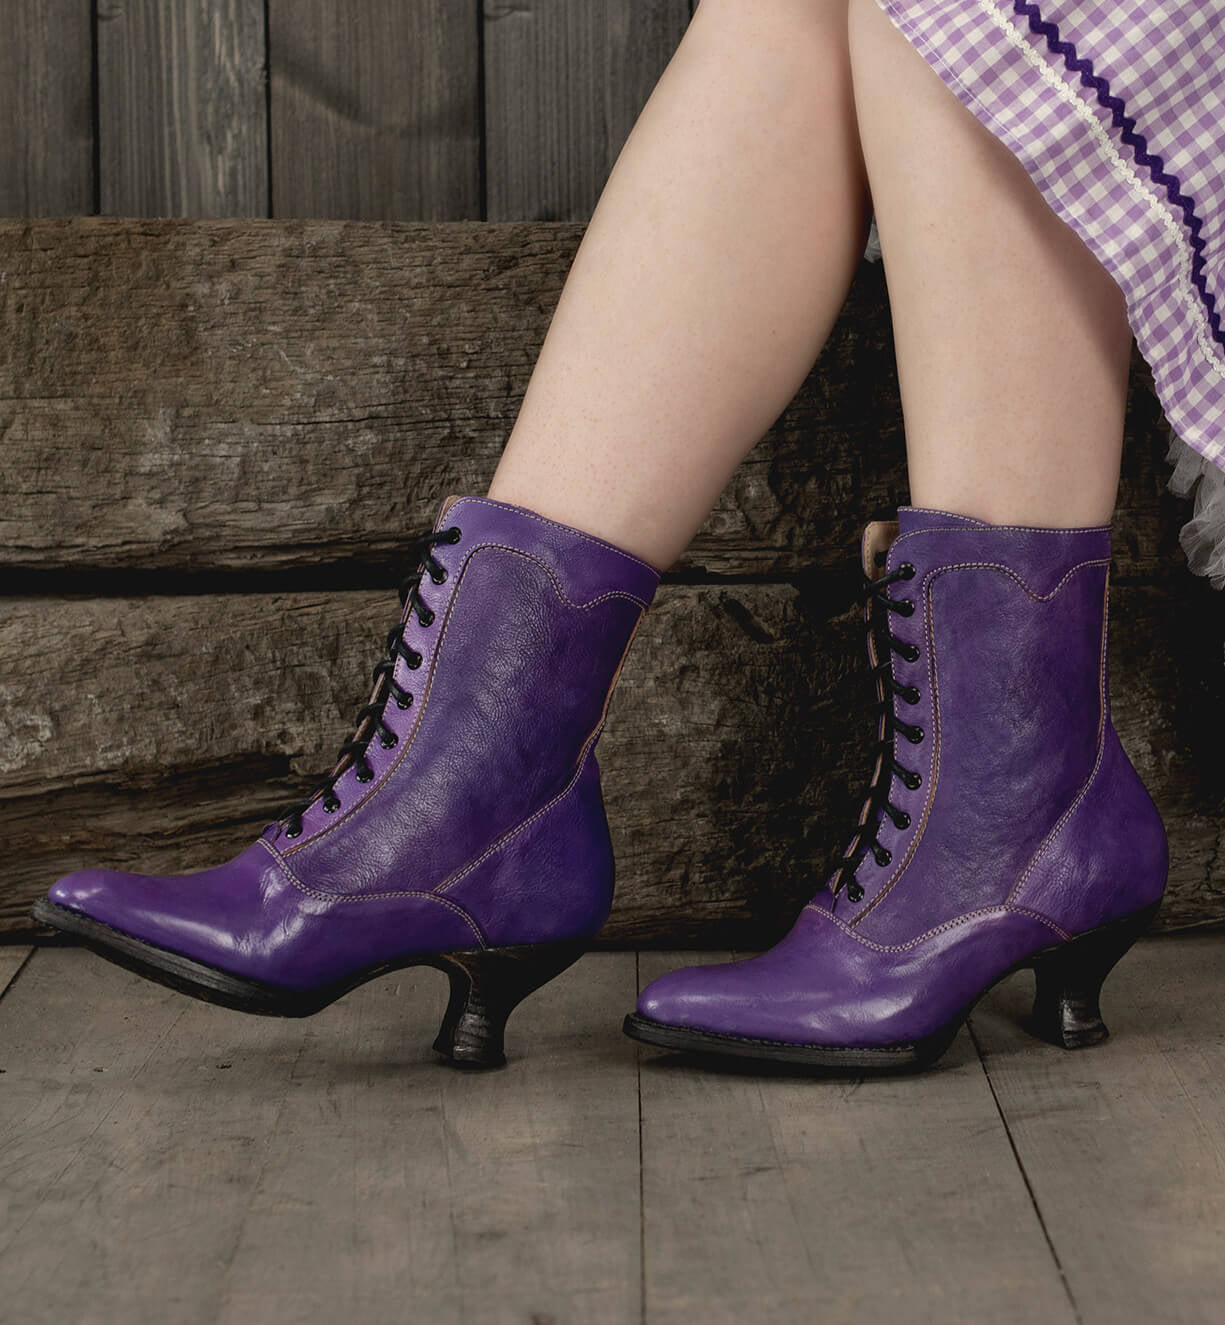 A woman displaying uncompromising quality in her Eleanor Victorian-style, hand-dyed purple leather boots as she stands on a wooden floor by Oak Tree Farms.